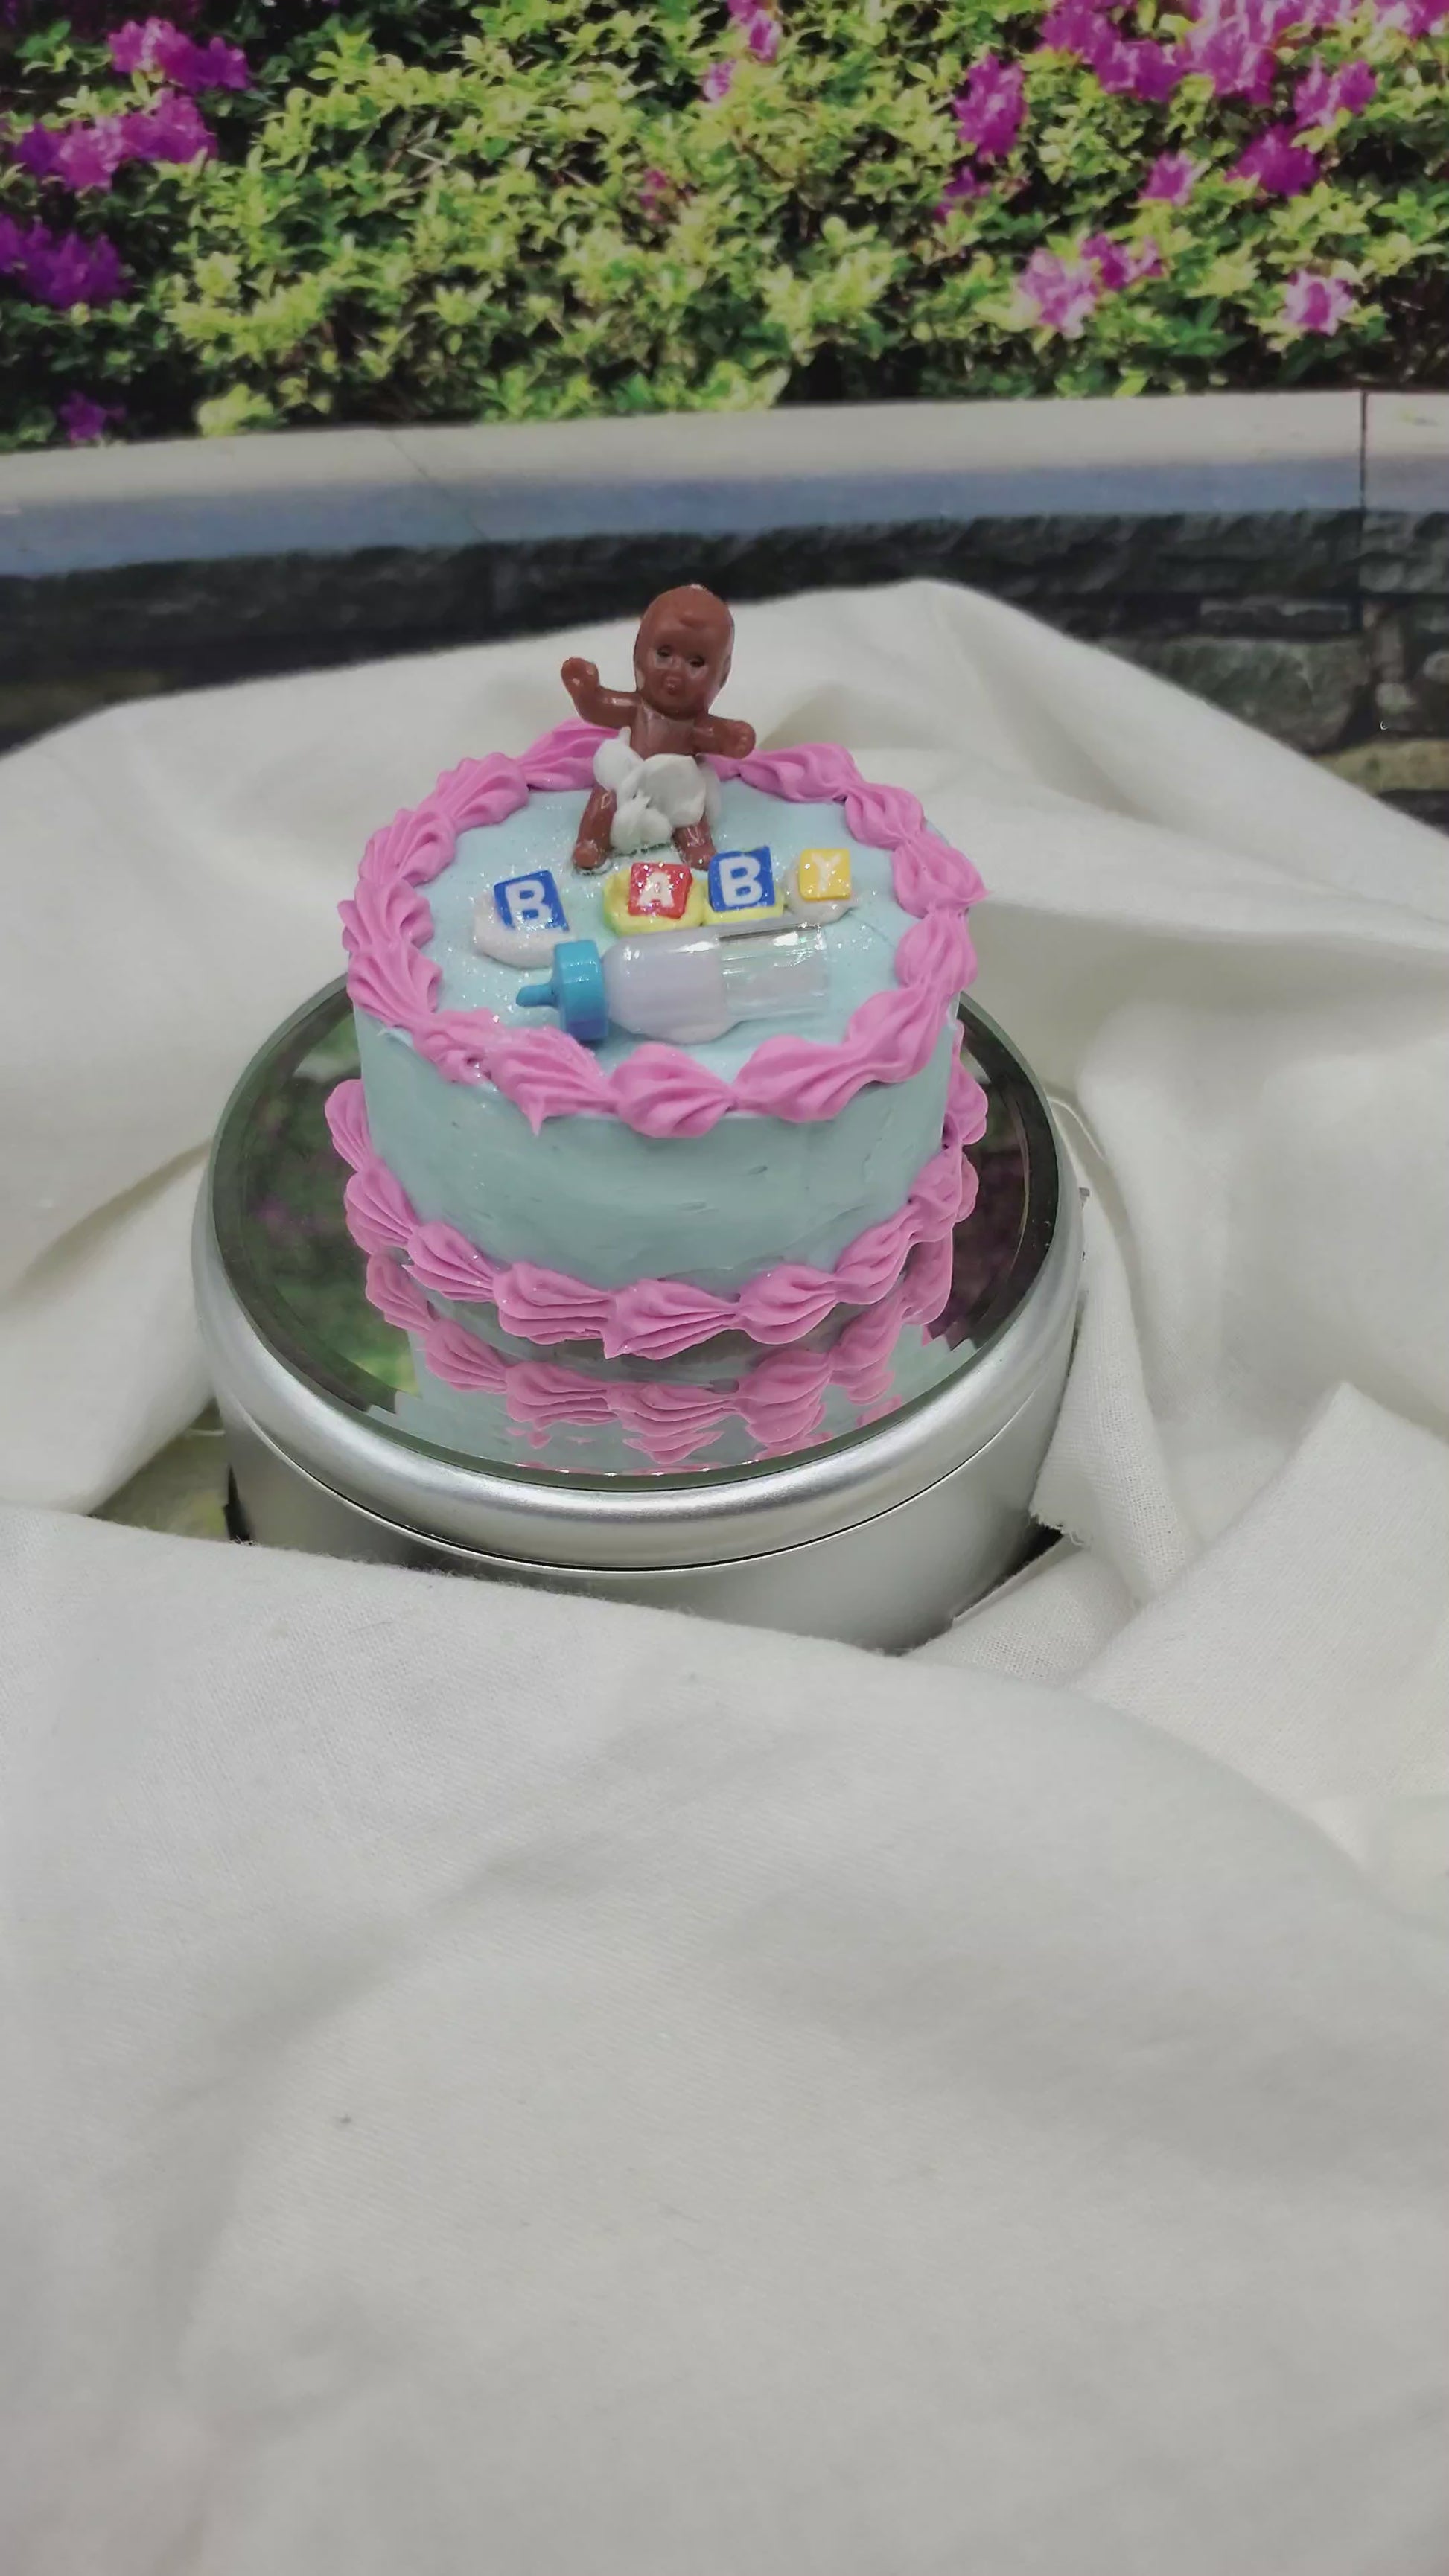 Video of 2 inch cake